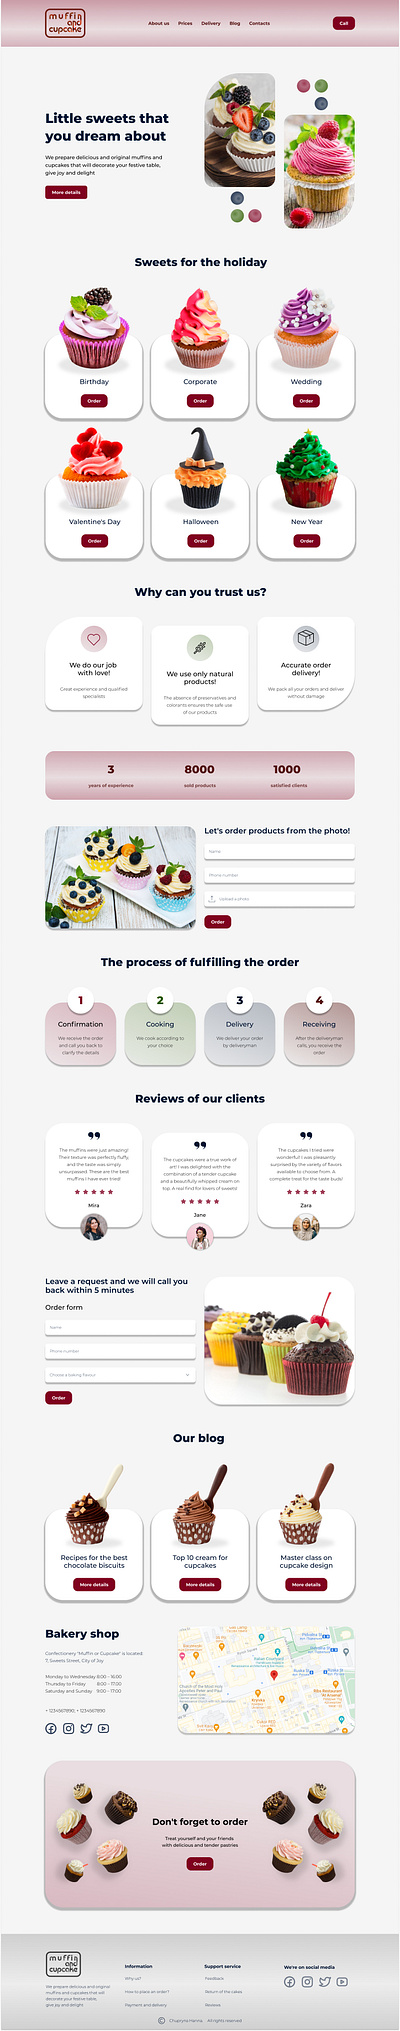 Landing page_Project Muffin and Cupcake